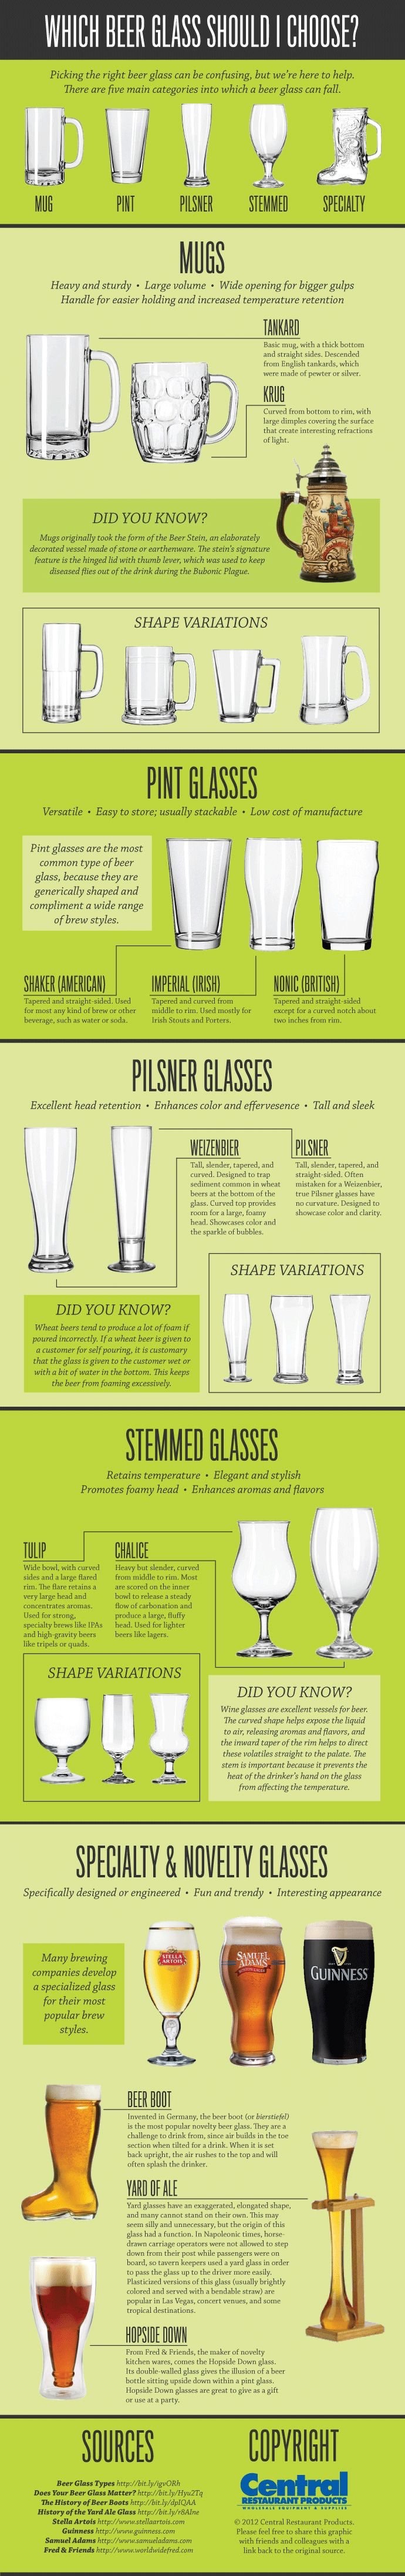 Picking the right beer glass